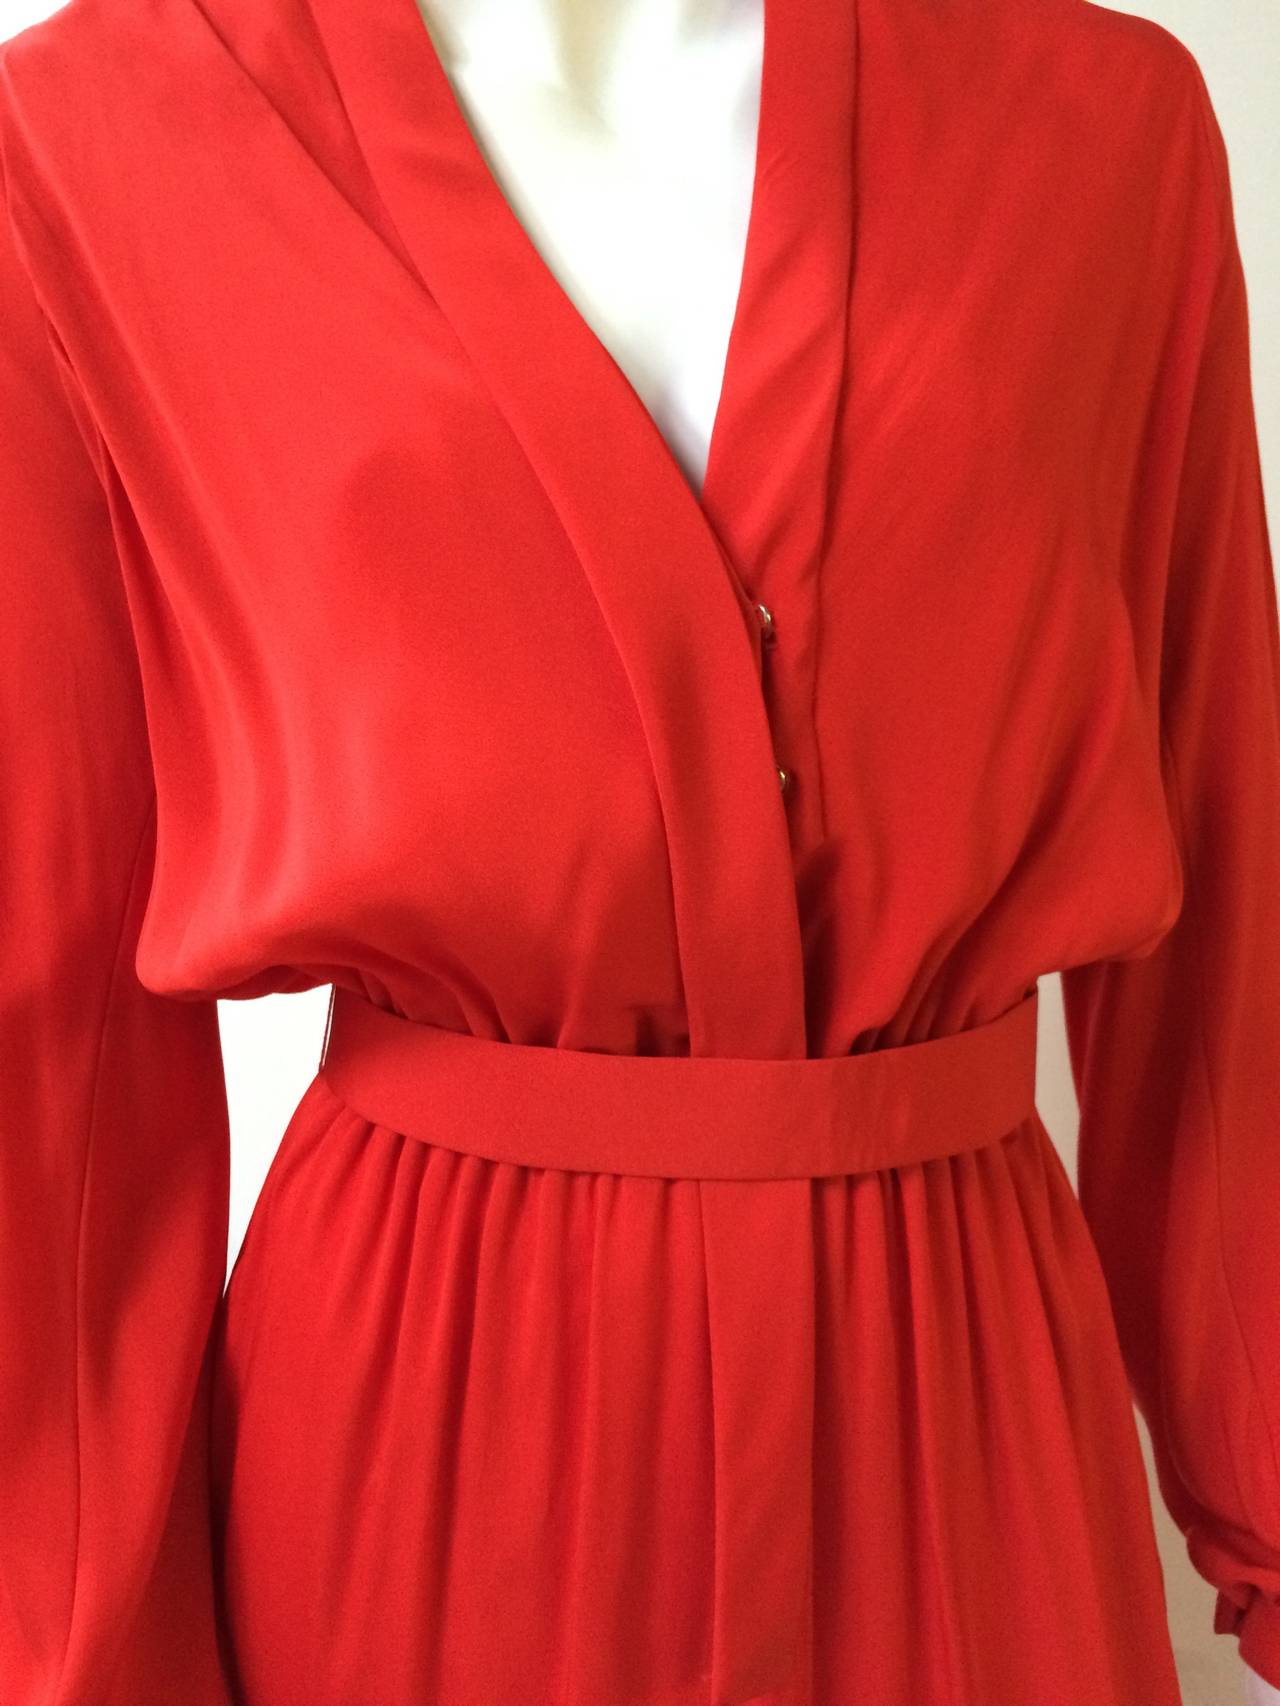 Geoffrey Beene 1960s Red Silk Maxi Dress with Pockets Size 4/6. In Good Condition For Sale In Atlanta, GA